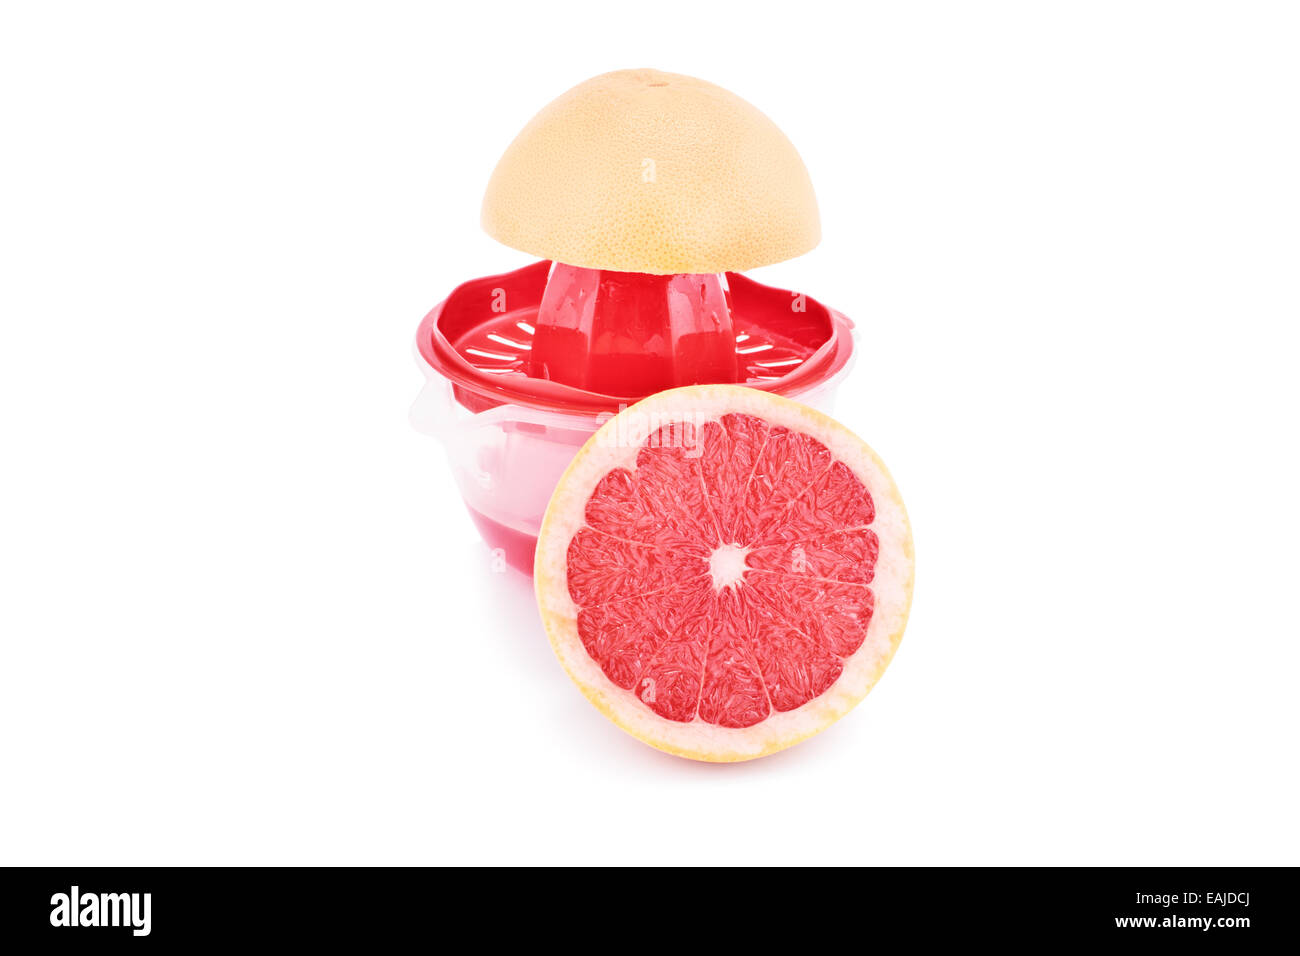 Half filled squeezer with citrus slices, isolated on white background. Making fresh grapefruit juice. Stock Photo